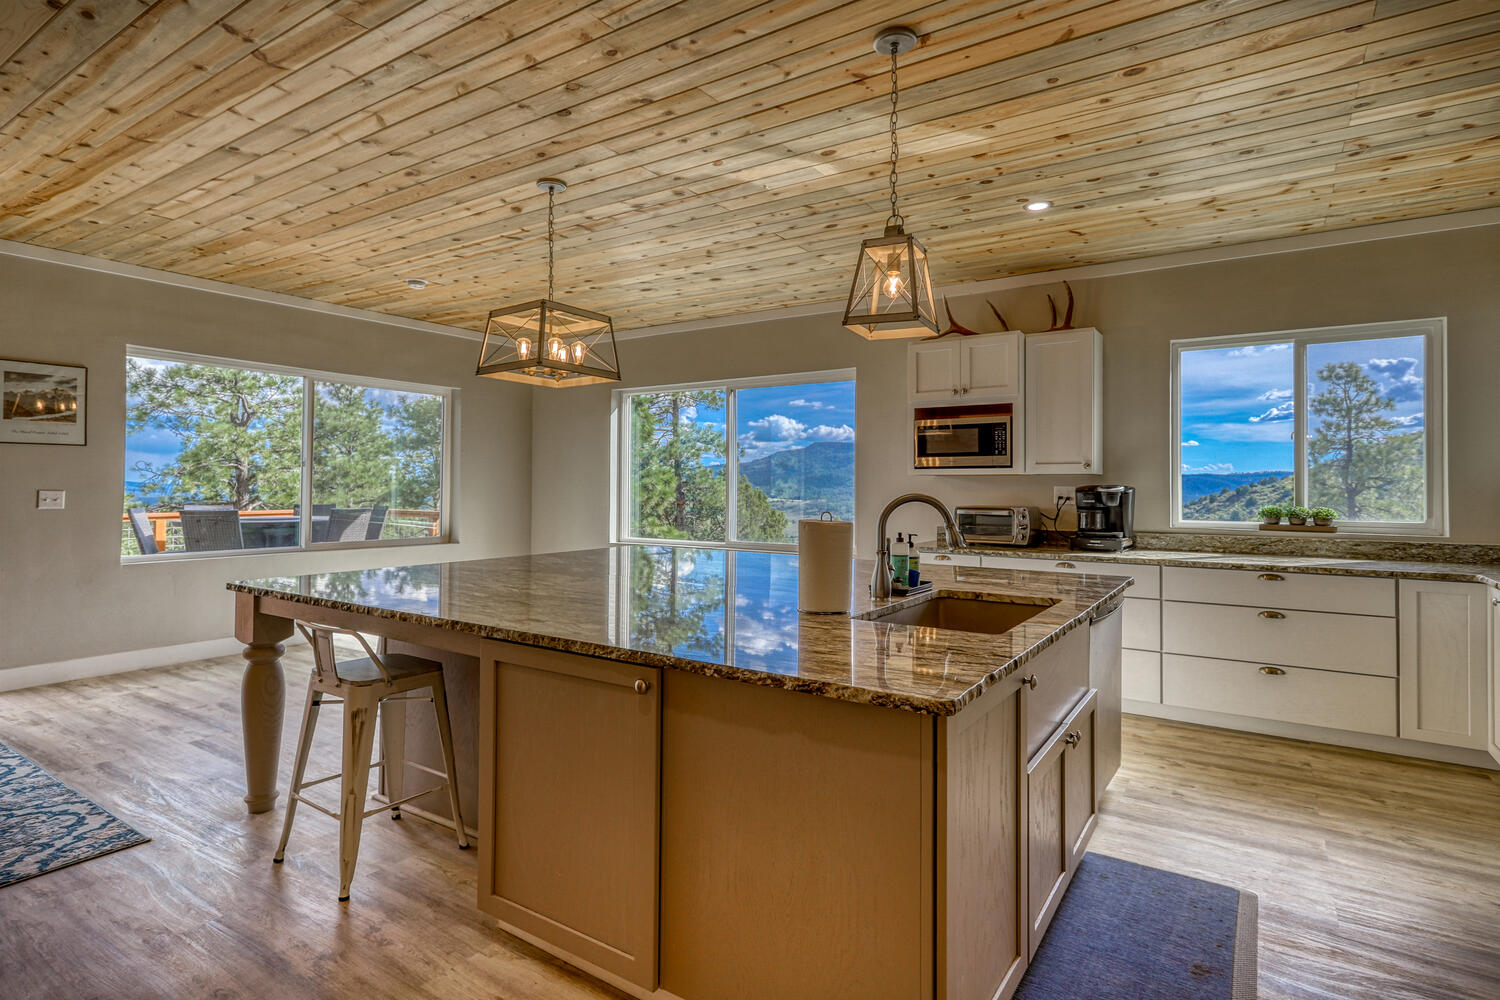 Kitchen in vacation rental with great mountain views by A River Runs Thru It